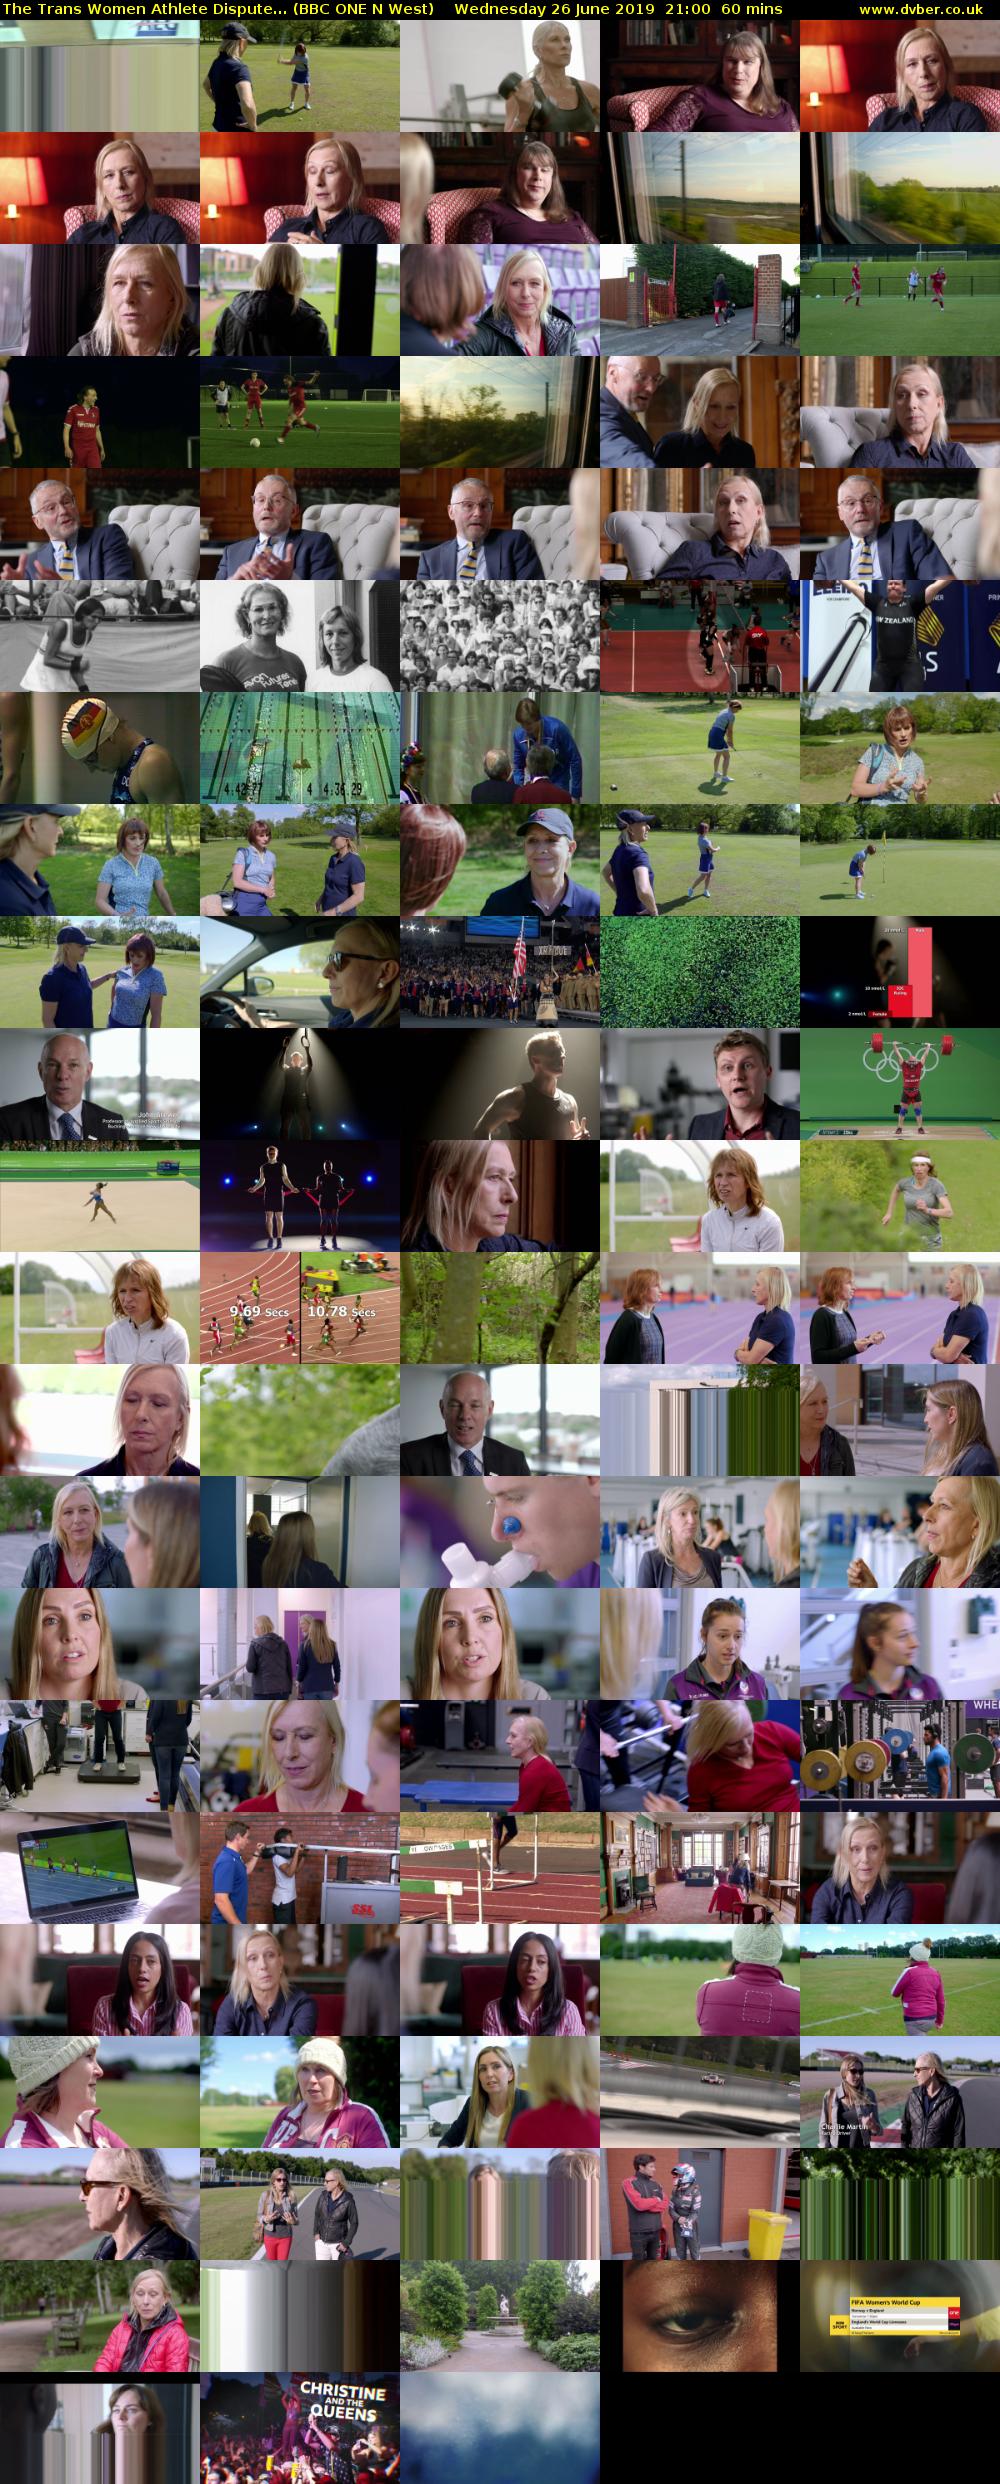 The Trans Women Athlete Dispute... (BBC ONE N West) Wednesday 26 June 2019 21:00 - 22:00